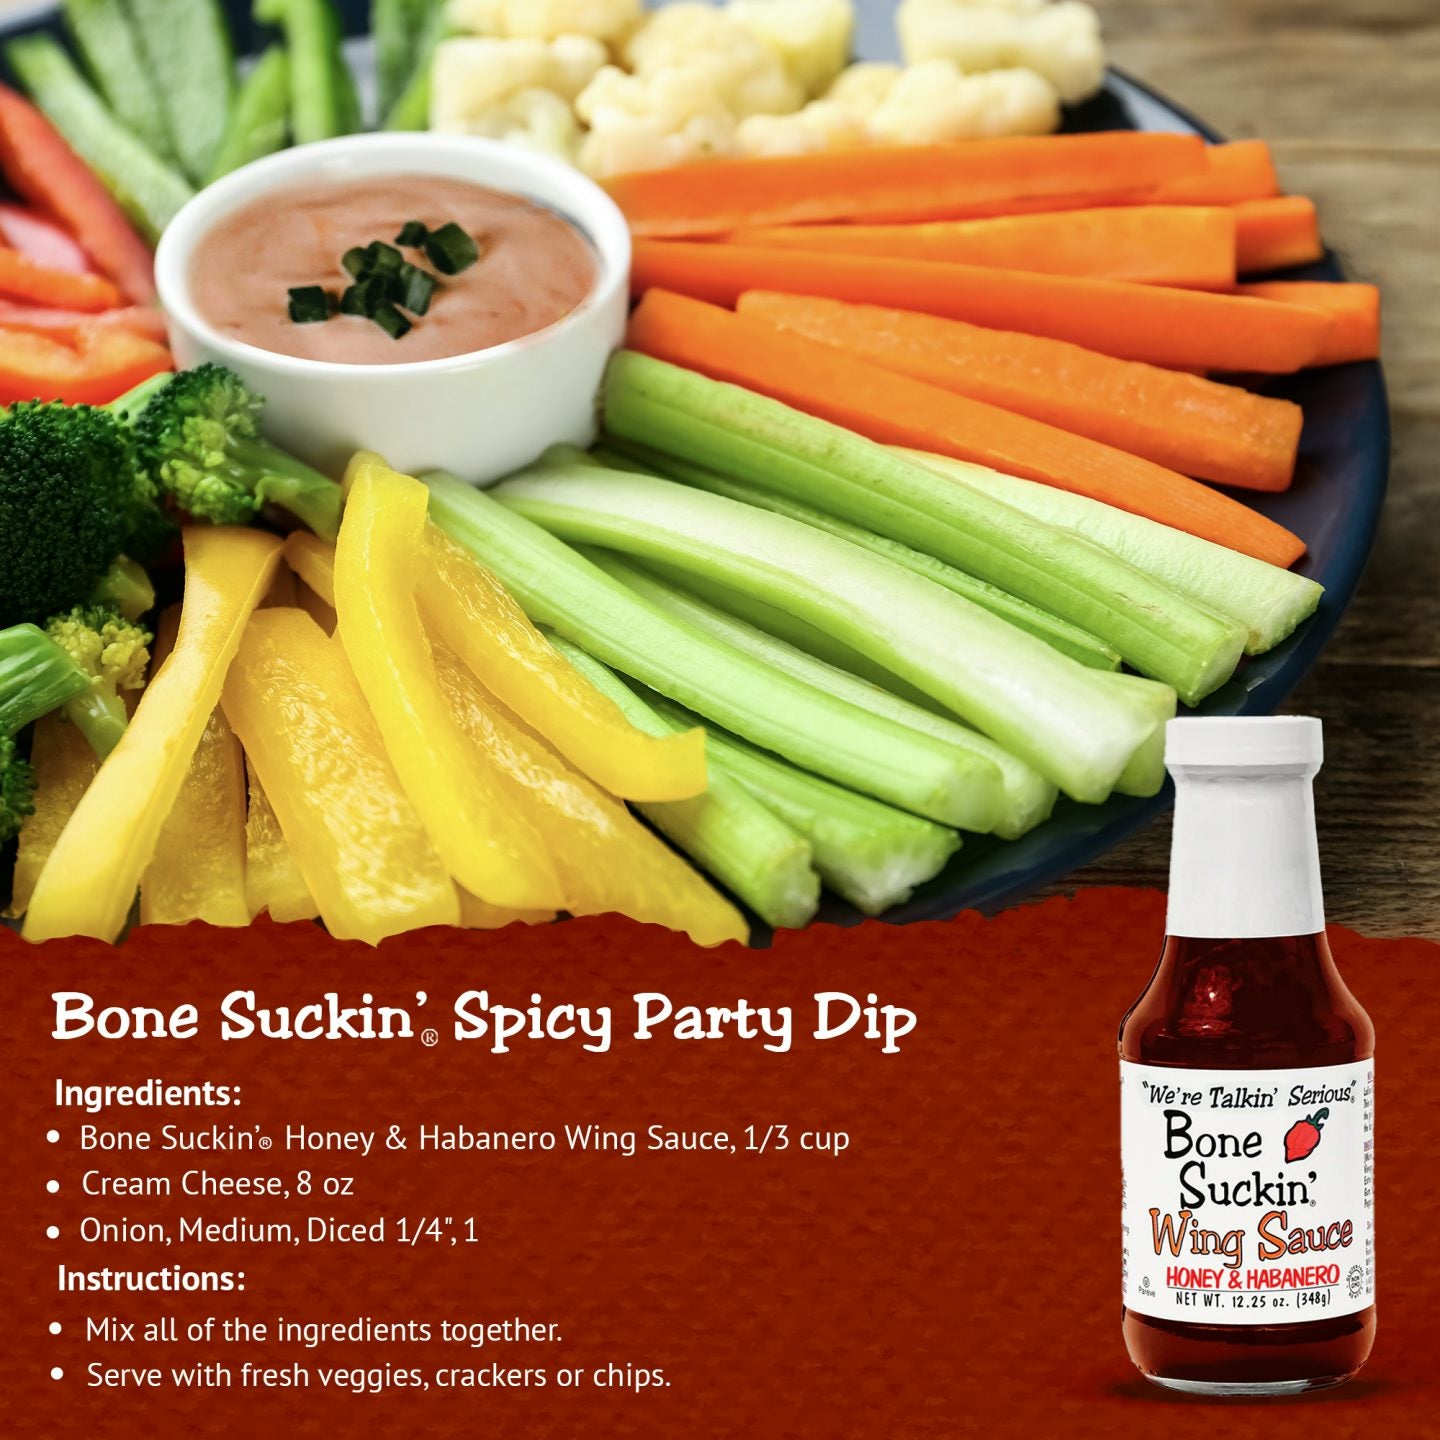 Bone Suckin'® Spicy Party Dip Recipe. Ingredients: Bone Suckin' Honey & Habanero Wing Sauce, 1/3 cup. 8 oz cream cheese. 1 medium onion diced into 1/4 inches. Instructions: Mix all of the ingredients together. Serve with fresh veggies, crackers, or chips.